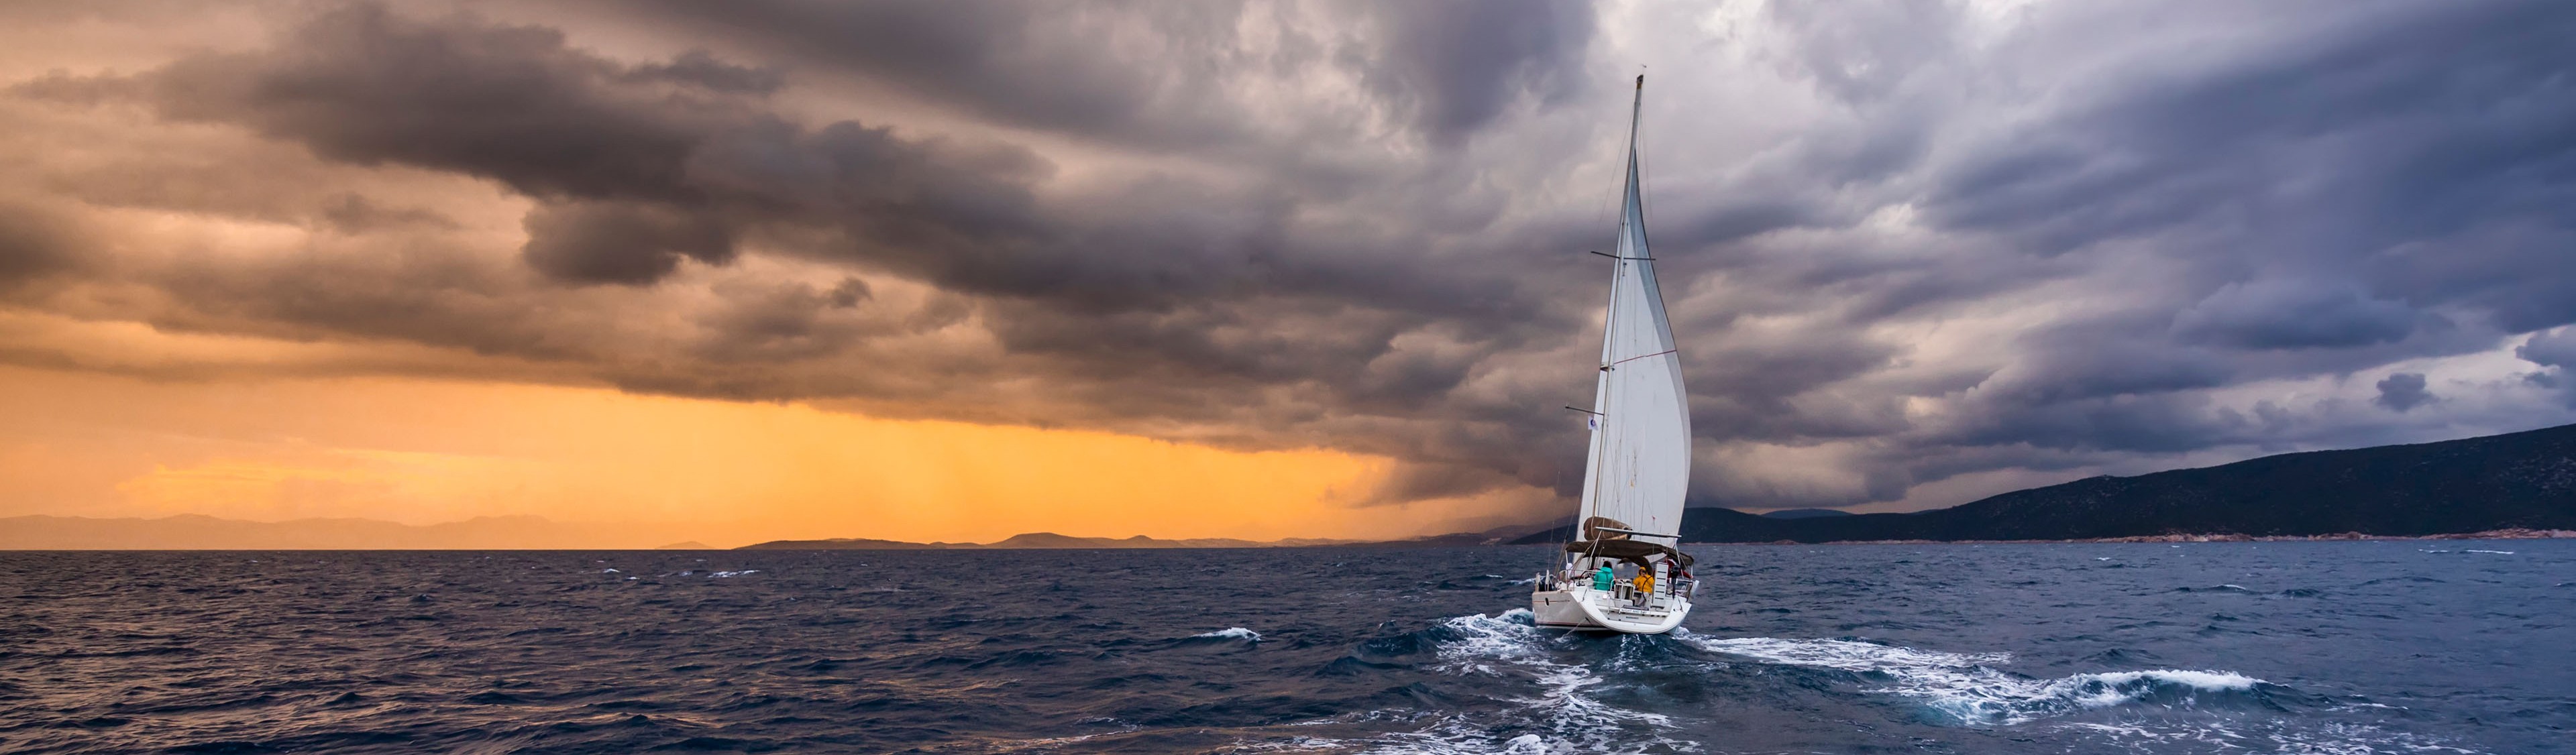 Yacht with white sails on a background of storm clouds